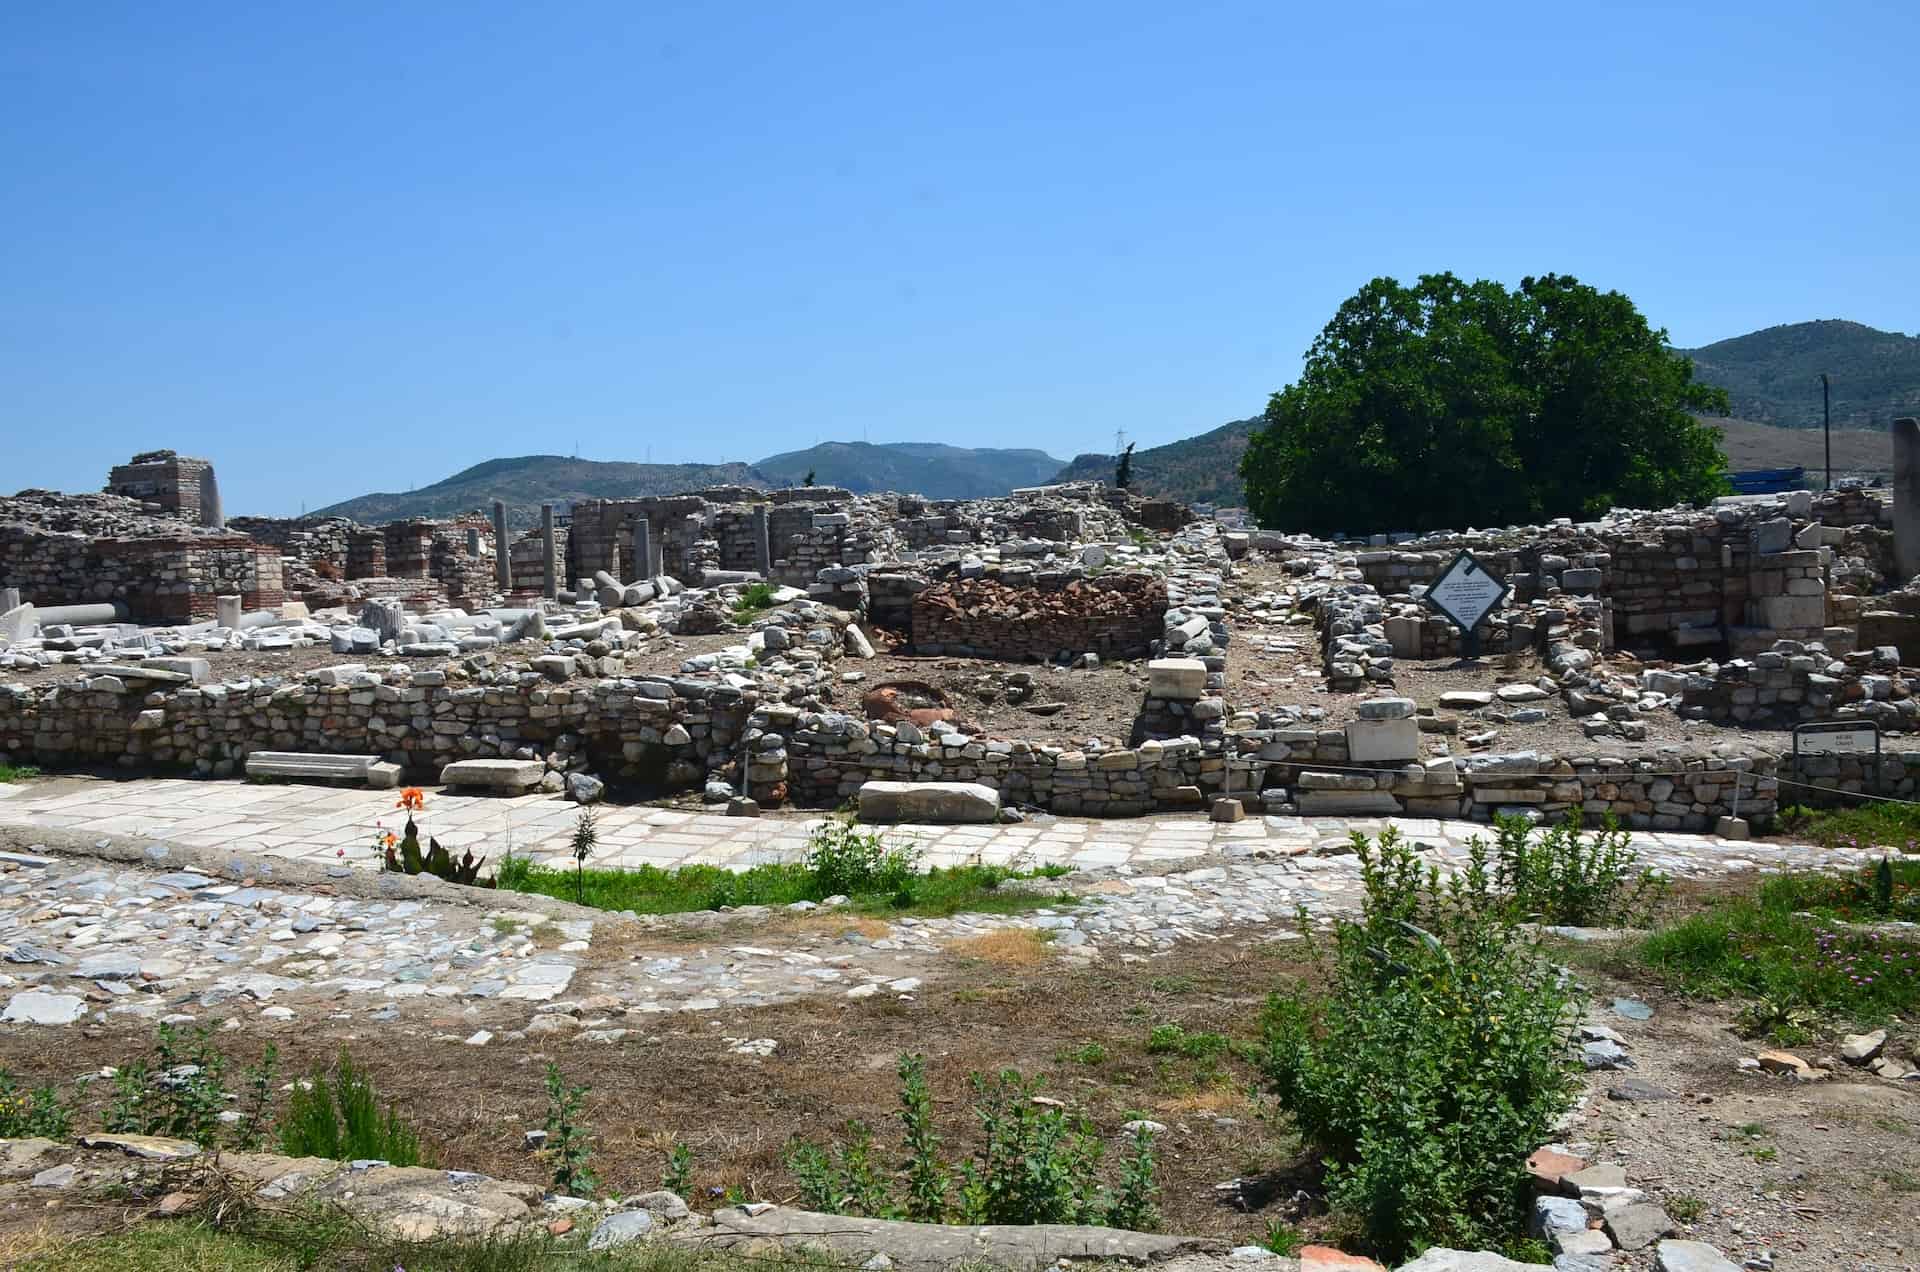 Byzantine period homes and shops